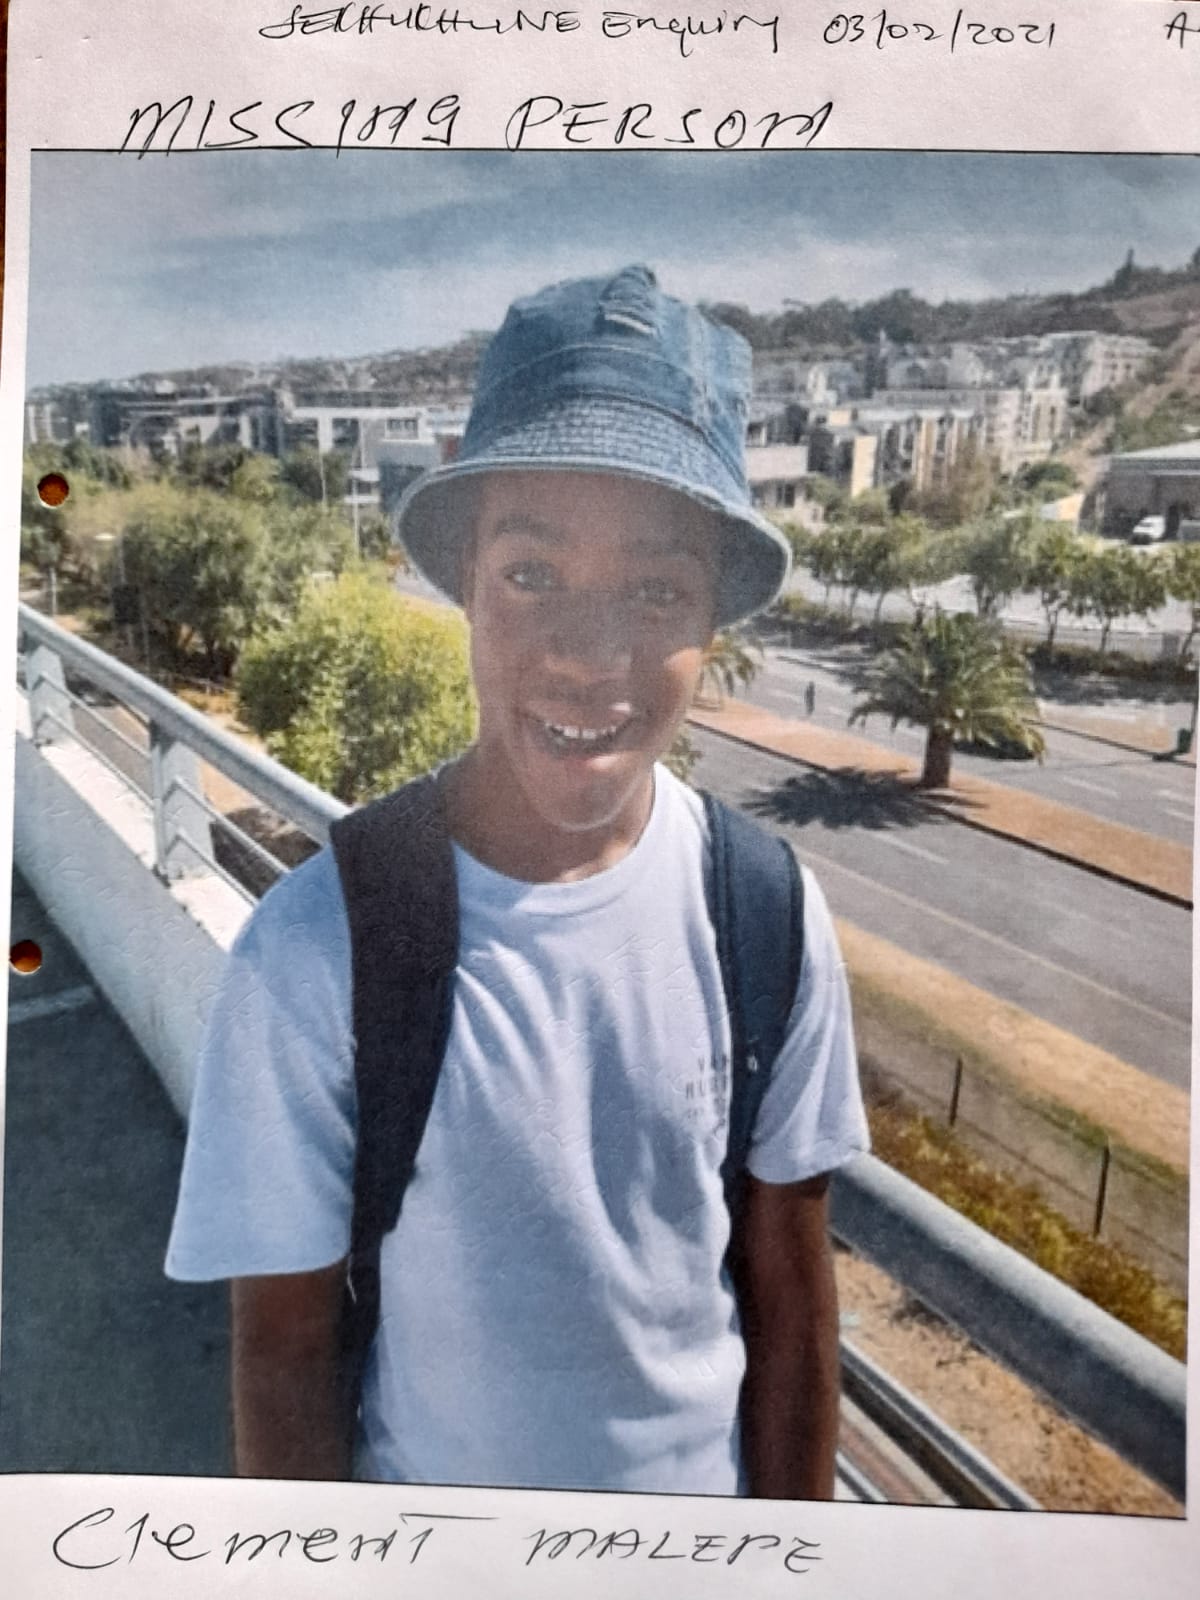 Police seek information to locate a missing young man